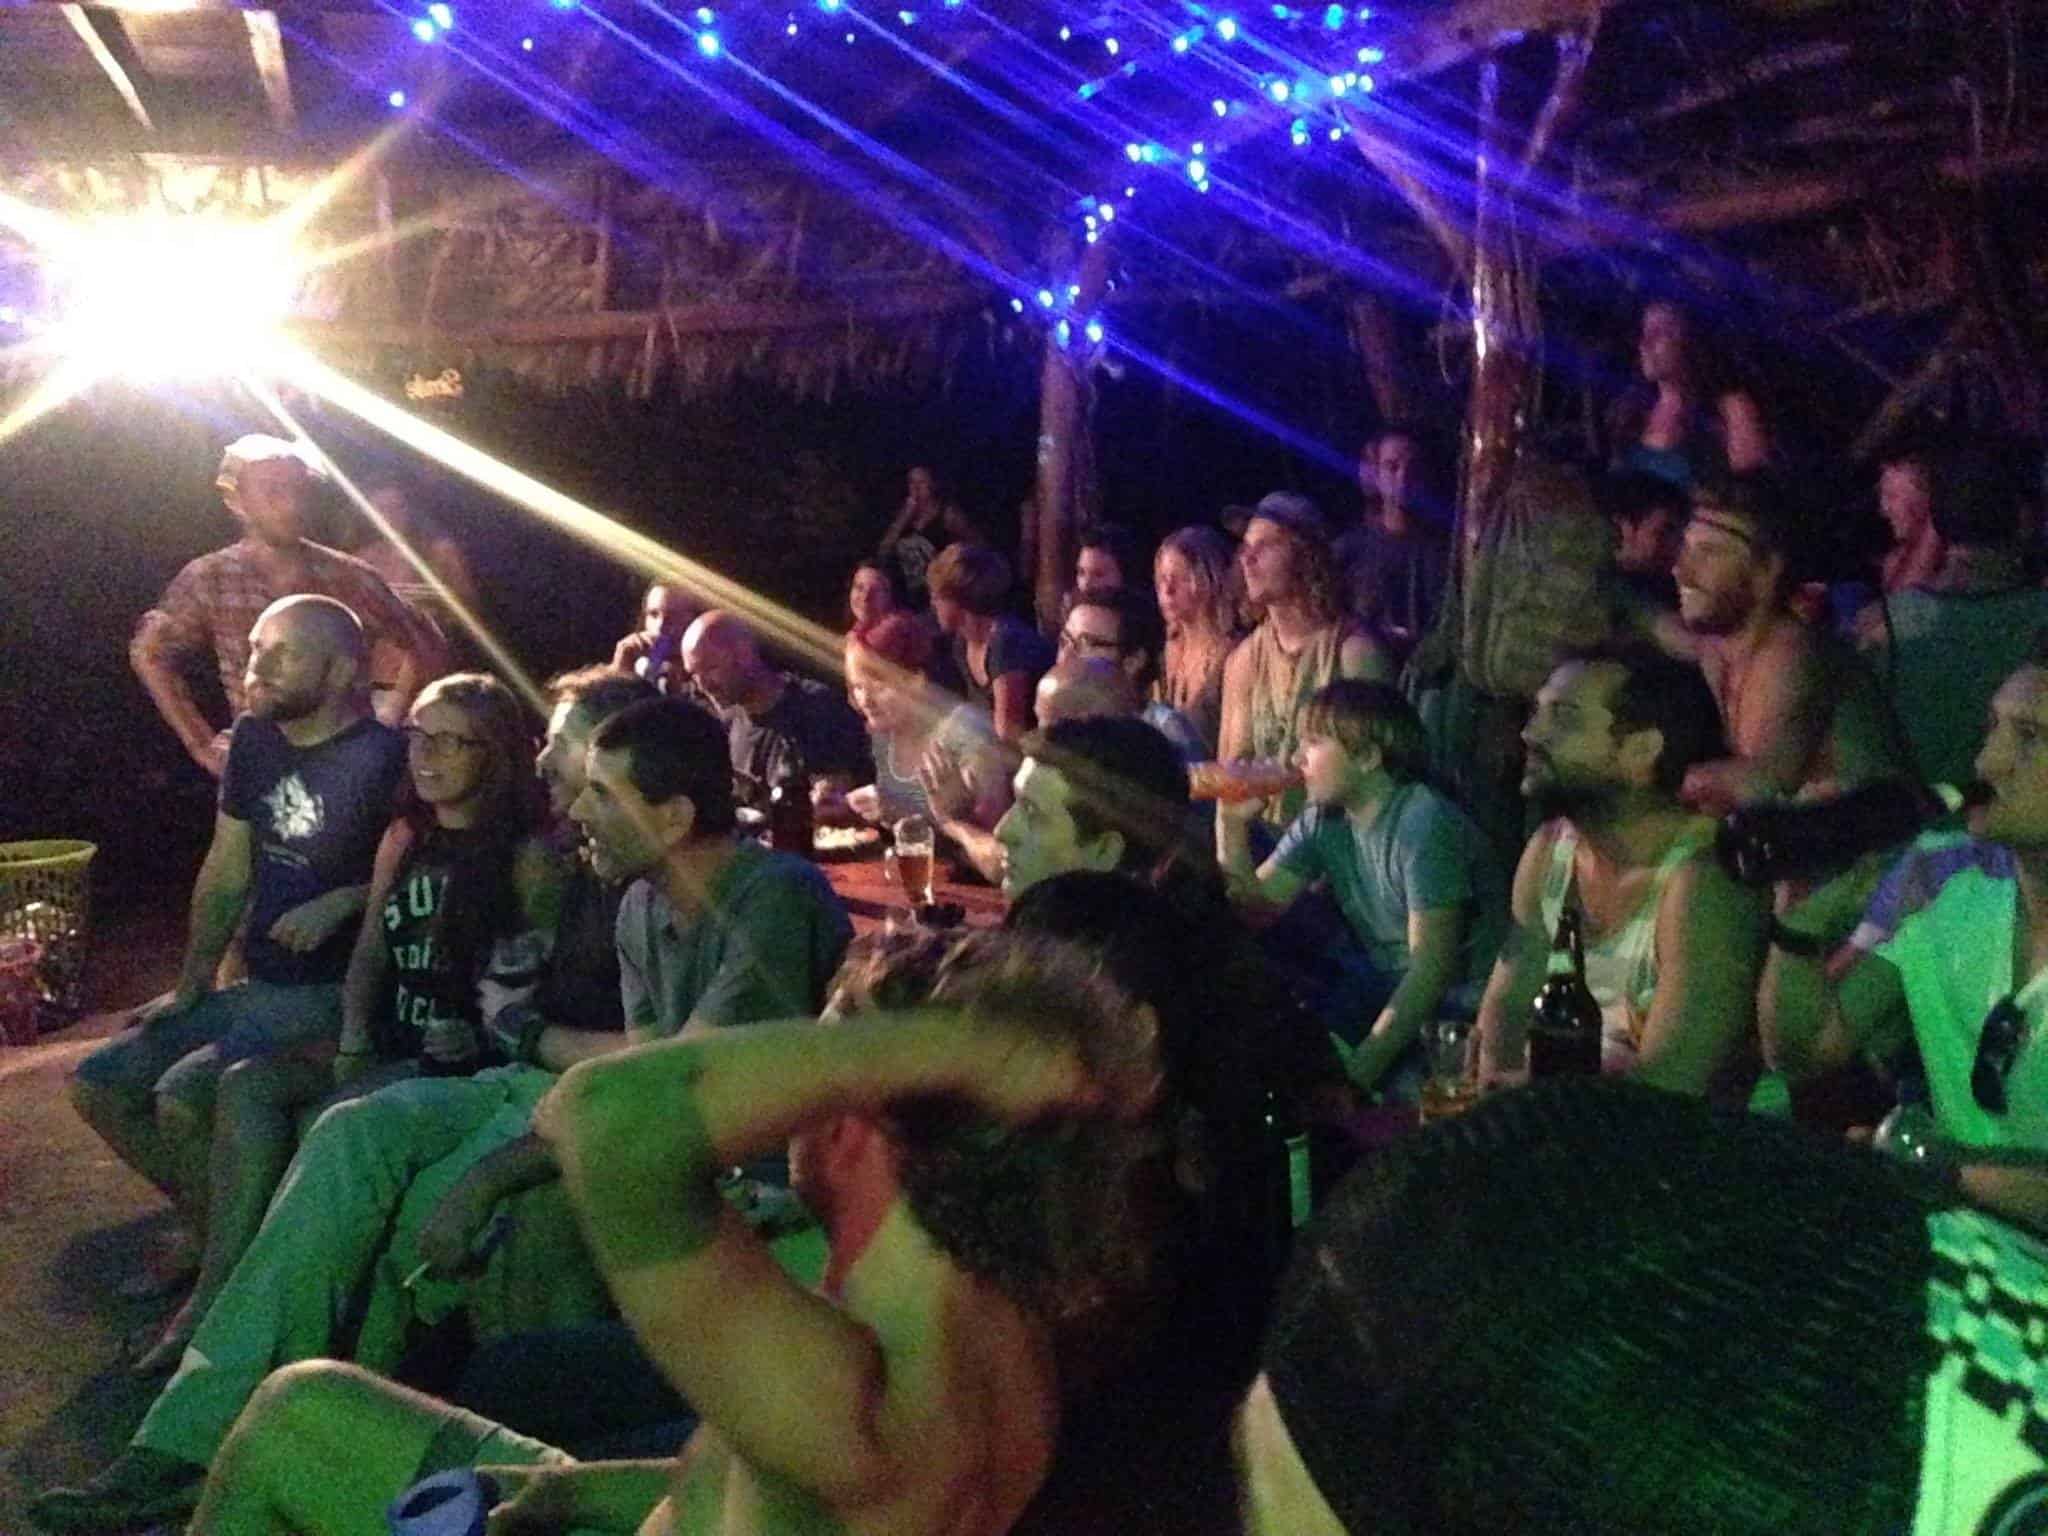 New England Patriots Superbowl watch party on Ometepe Island in Nicaragua